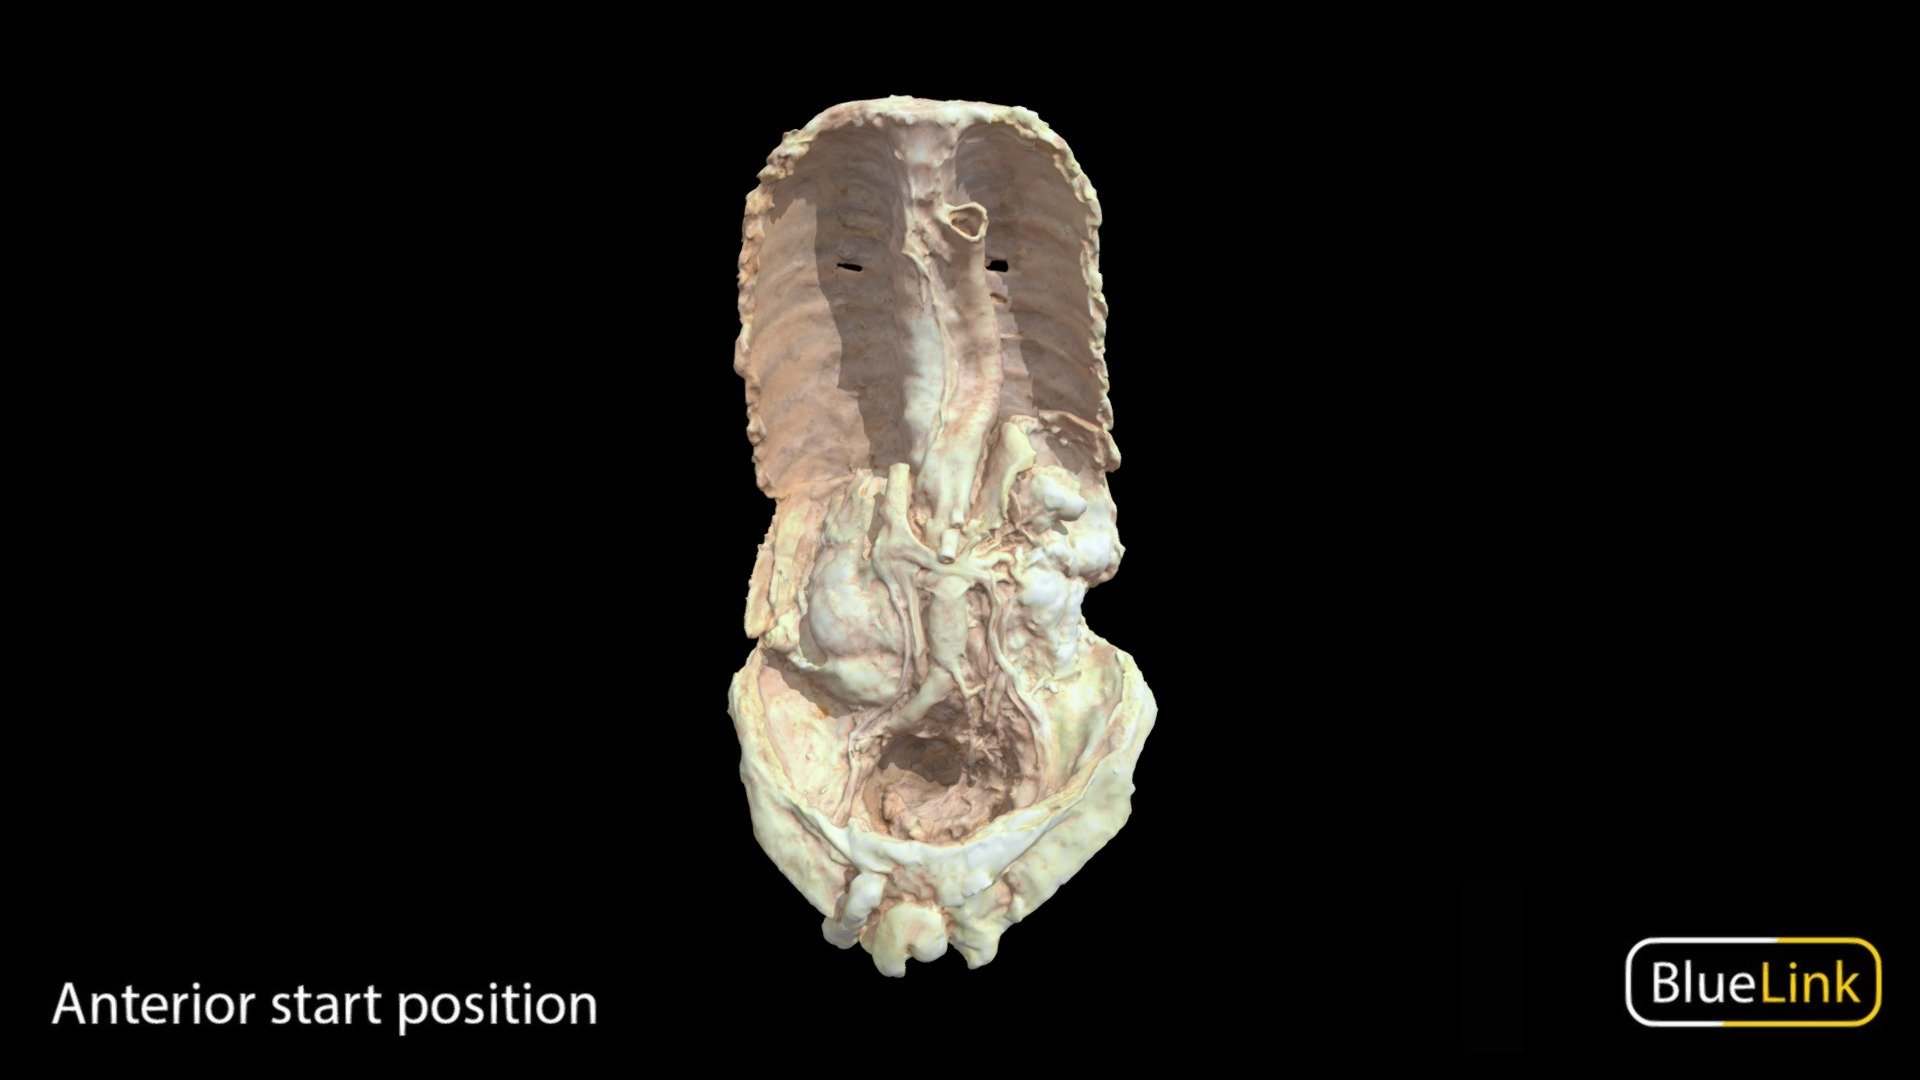 3D scan of a human abdomen showcasing the abdominal aorta
Captured with: Einscan Pro
Captured by: Will Gribbin
Edited by: Cristina Prall
University of Michigan
28877-T01 - Abdominal Aorta - 3D model by Bluelink Anatomy - University of Michigan (@bluelinkanatomy) 3d model